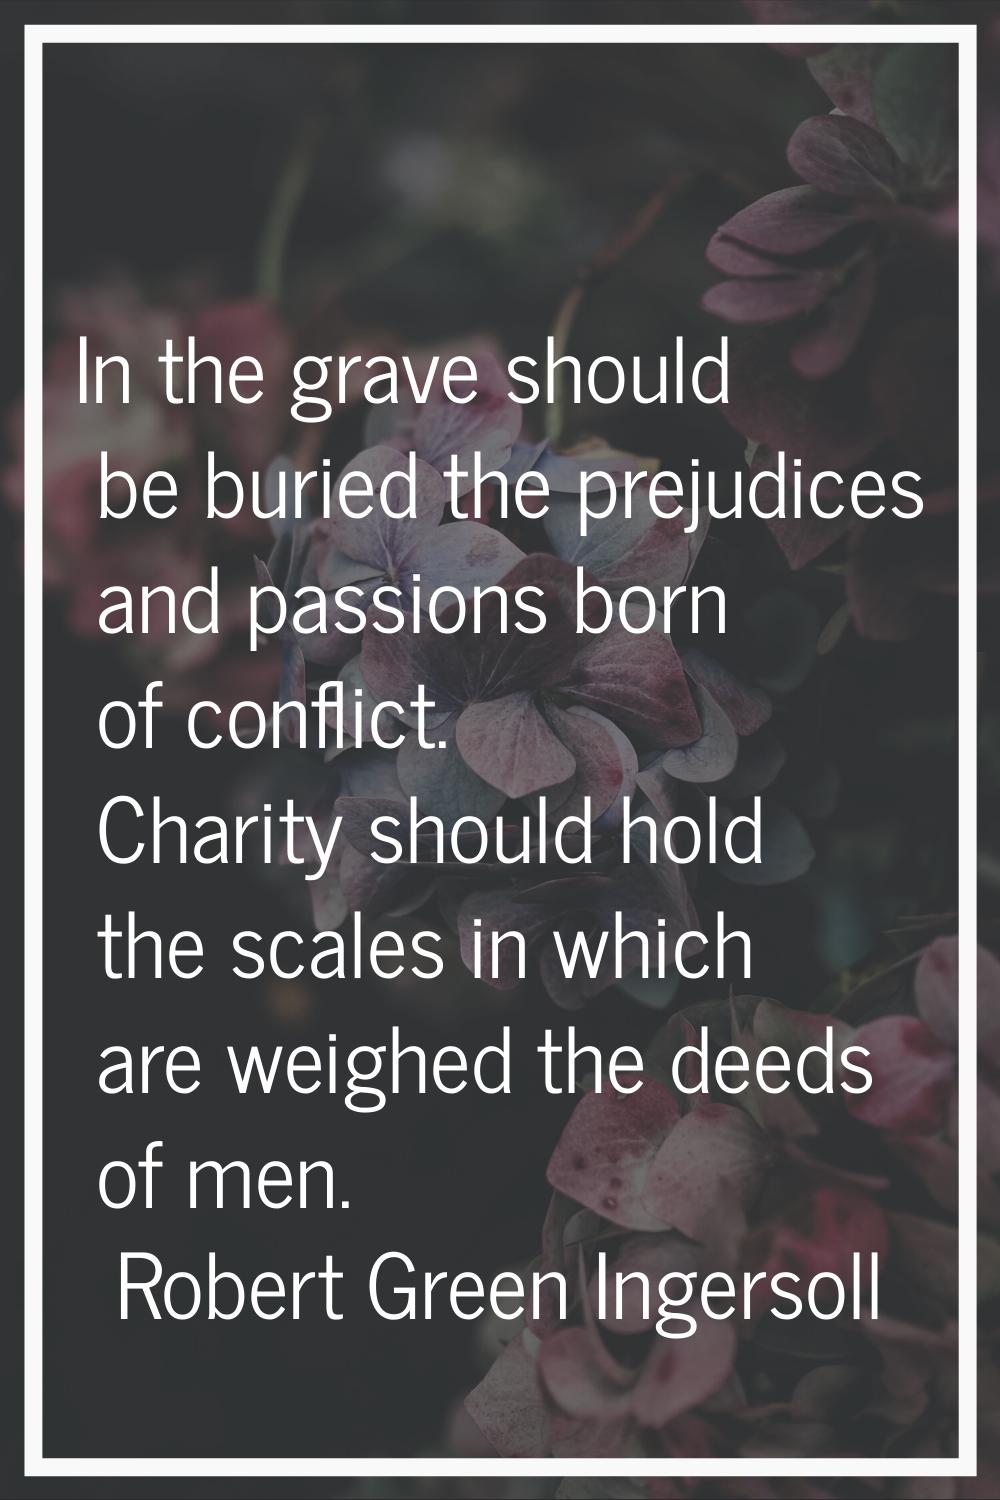 In the grave should be buried the prejudices and passions born of conflict. Charity should hold the